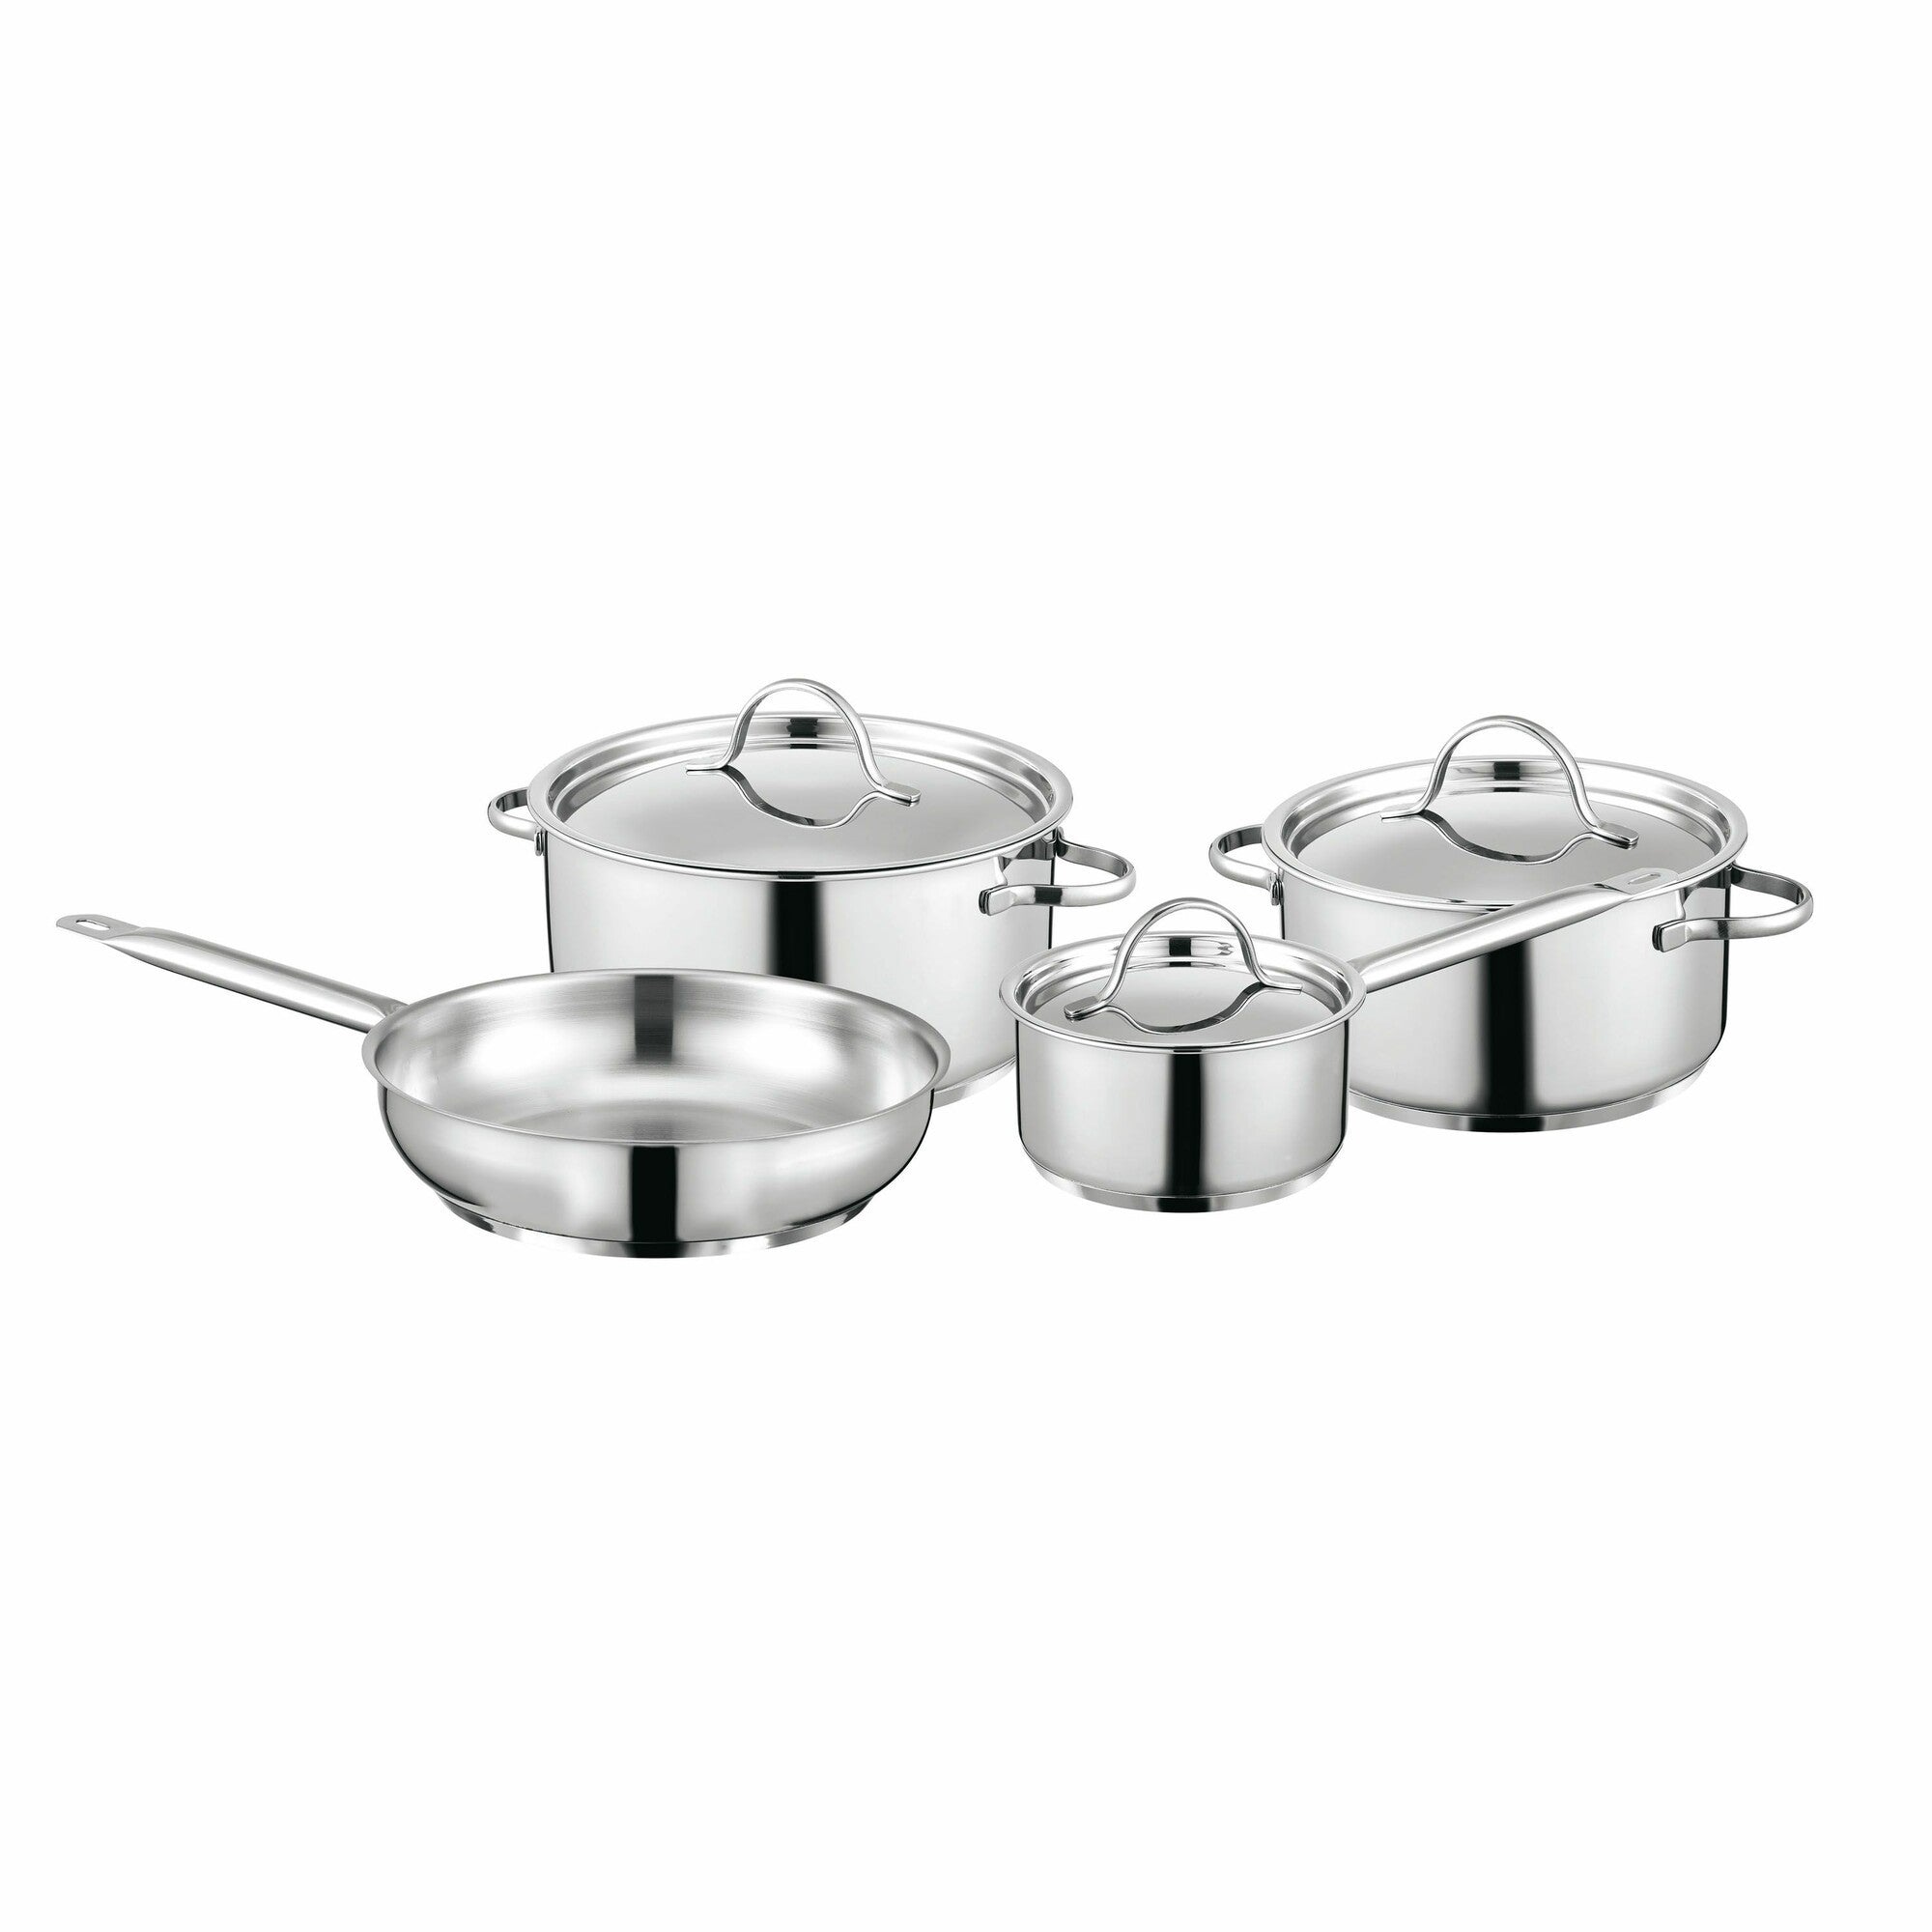 7-pc cookware set with stainless steel lid Comfort